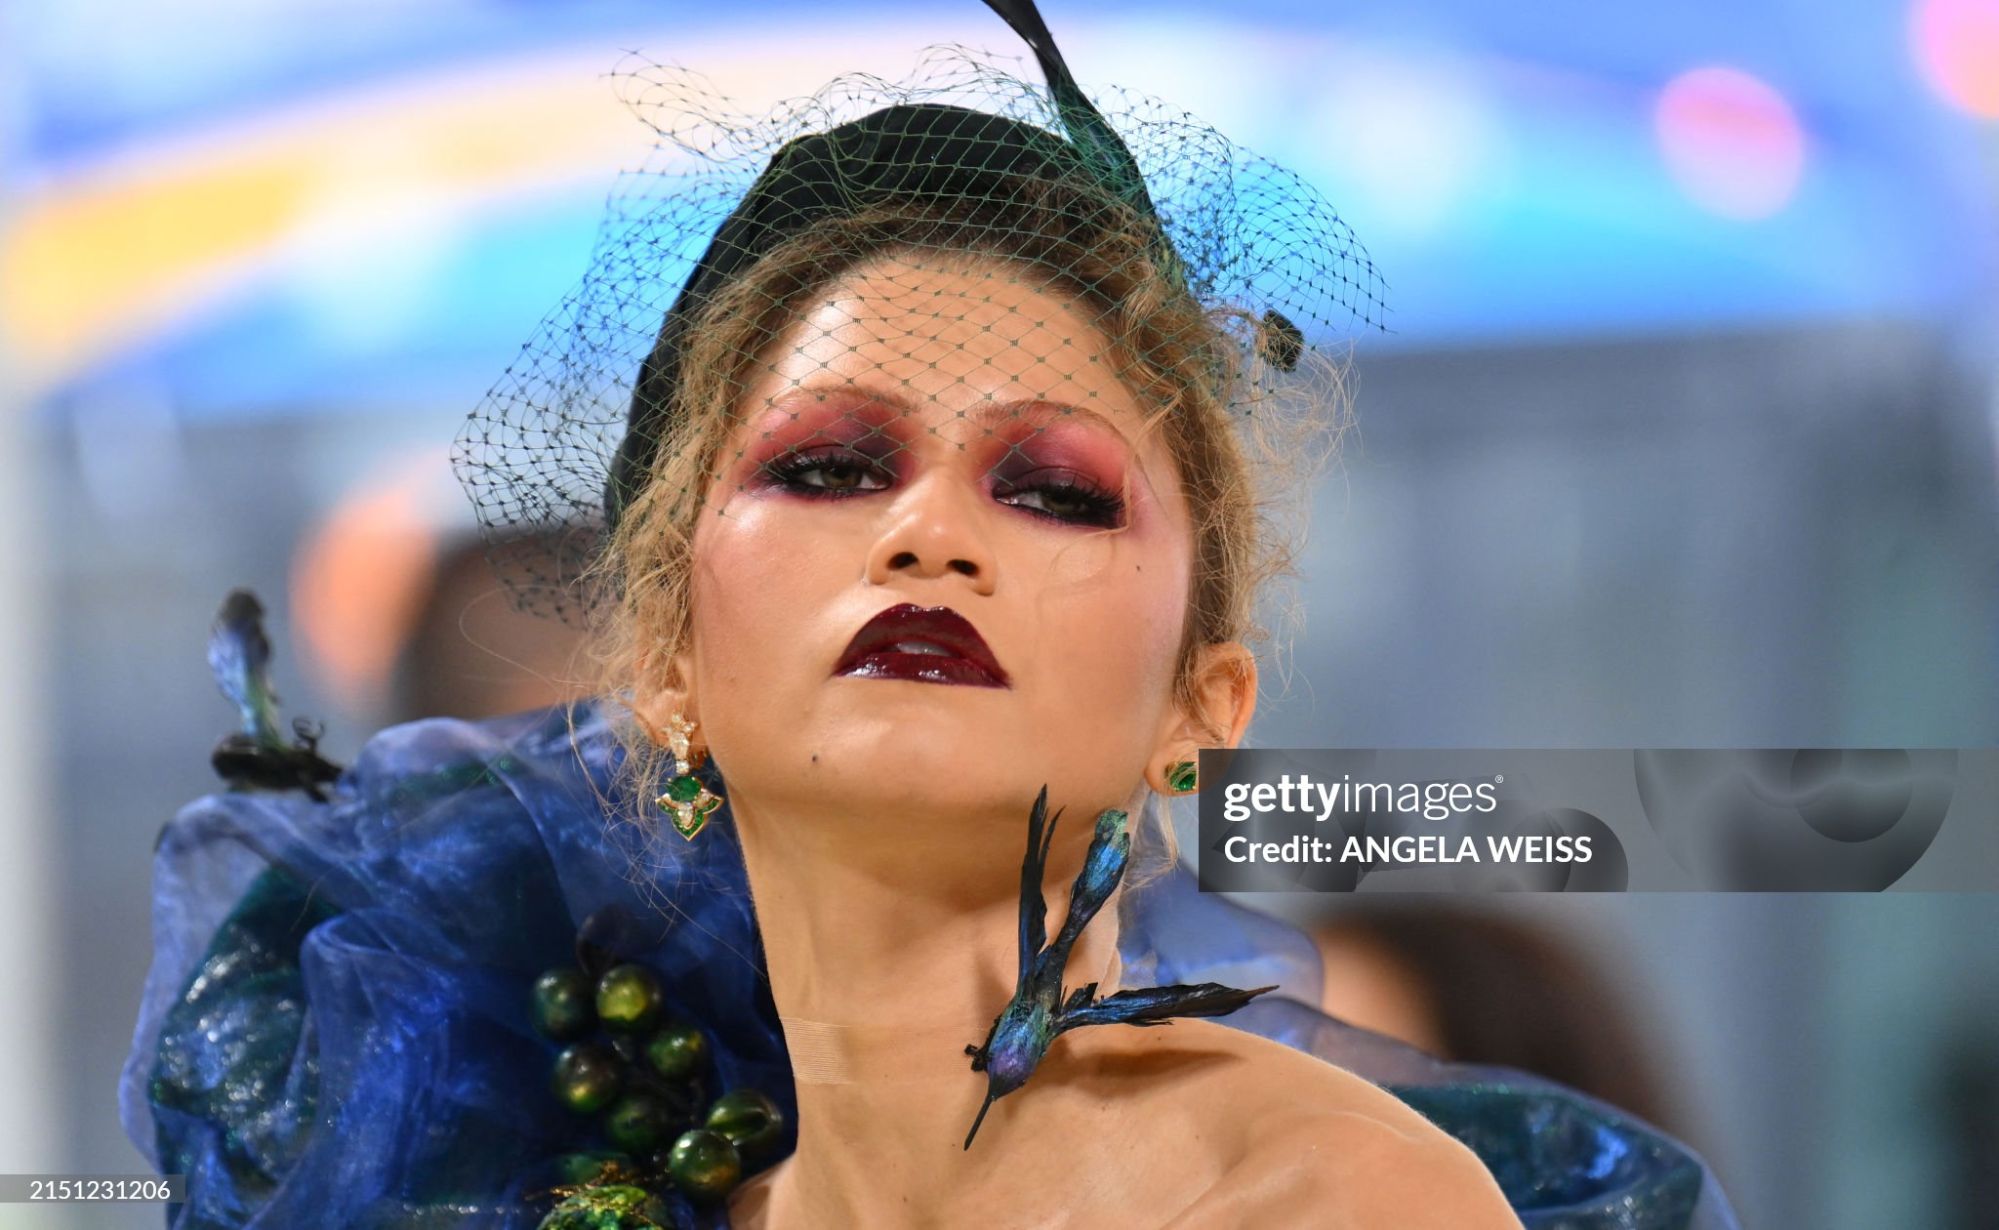 gettyimages-2151231206-2048x2048.jpg